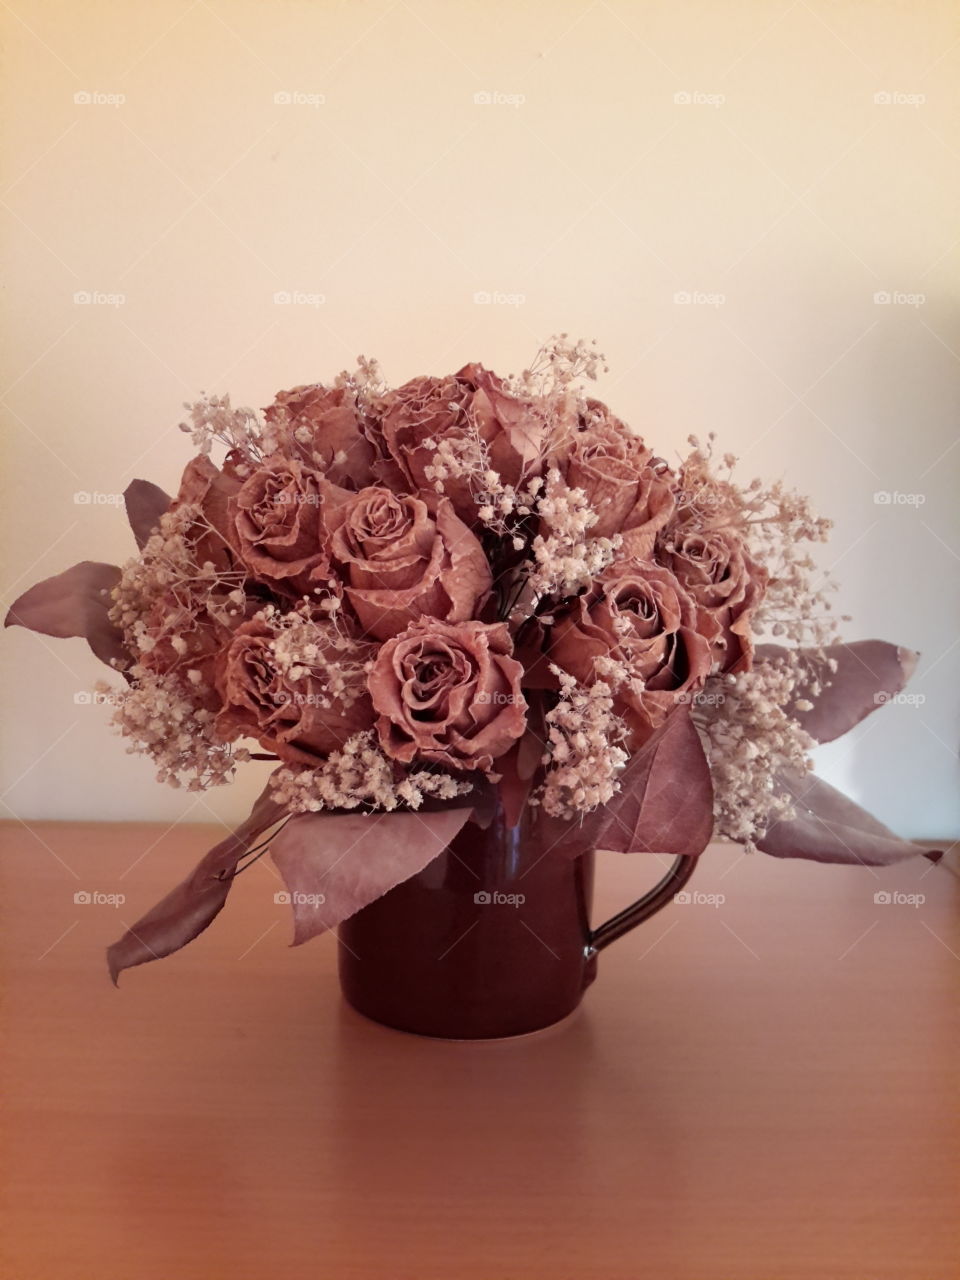 Bouquet of dried roses